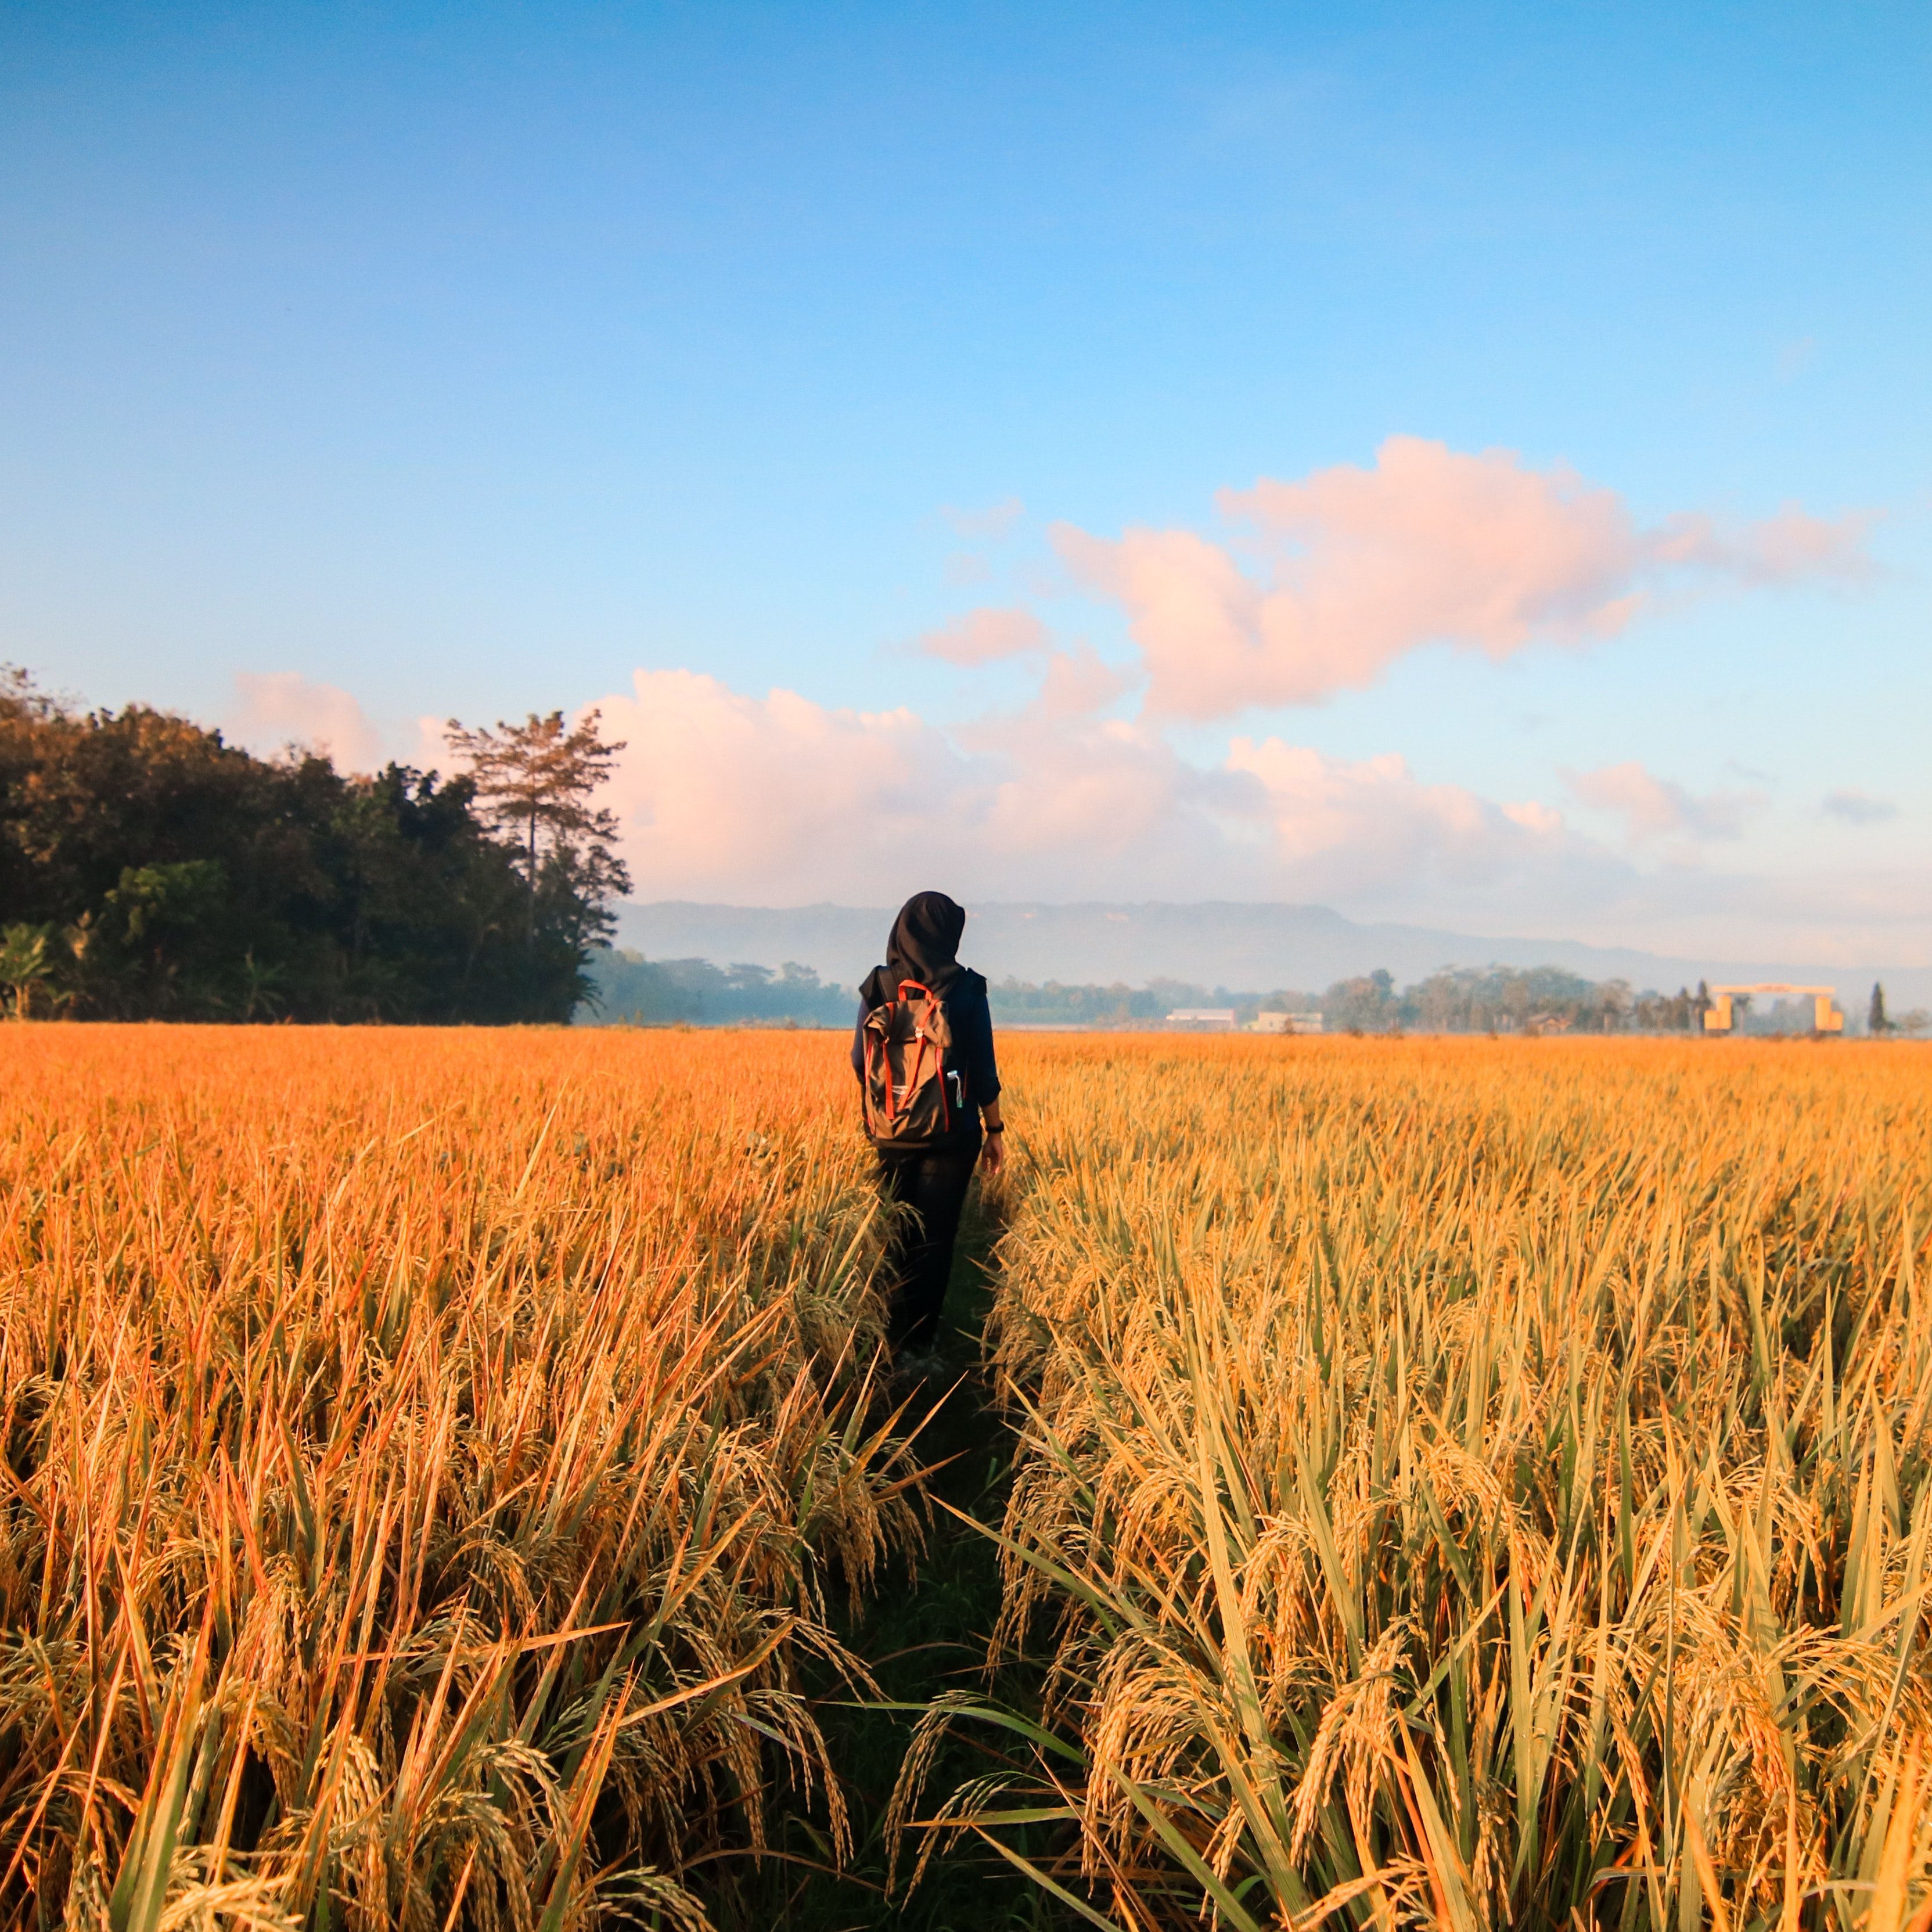 A person walking through the middle of some tall grass - Farm